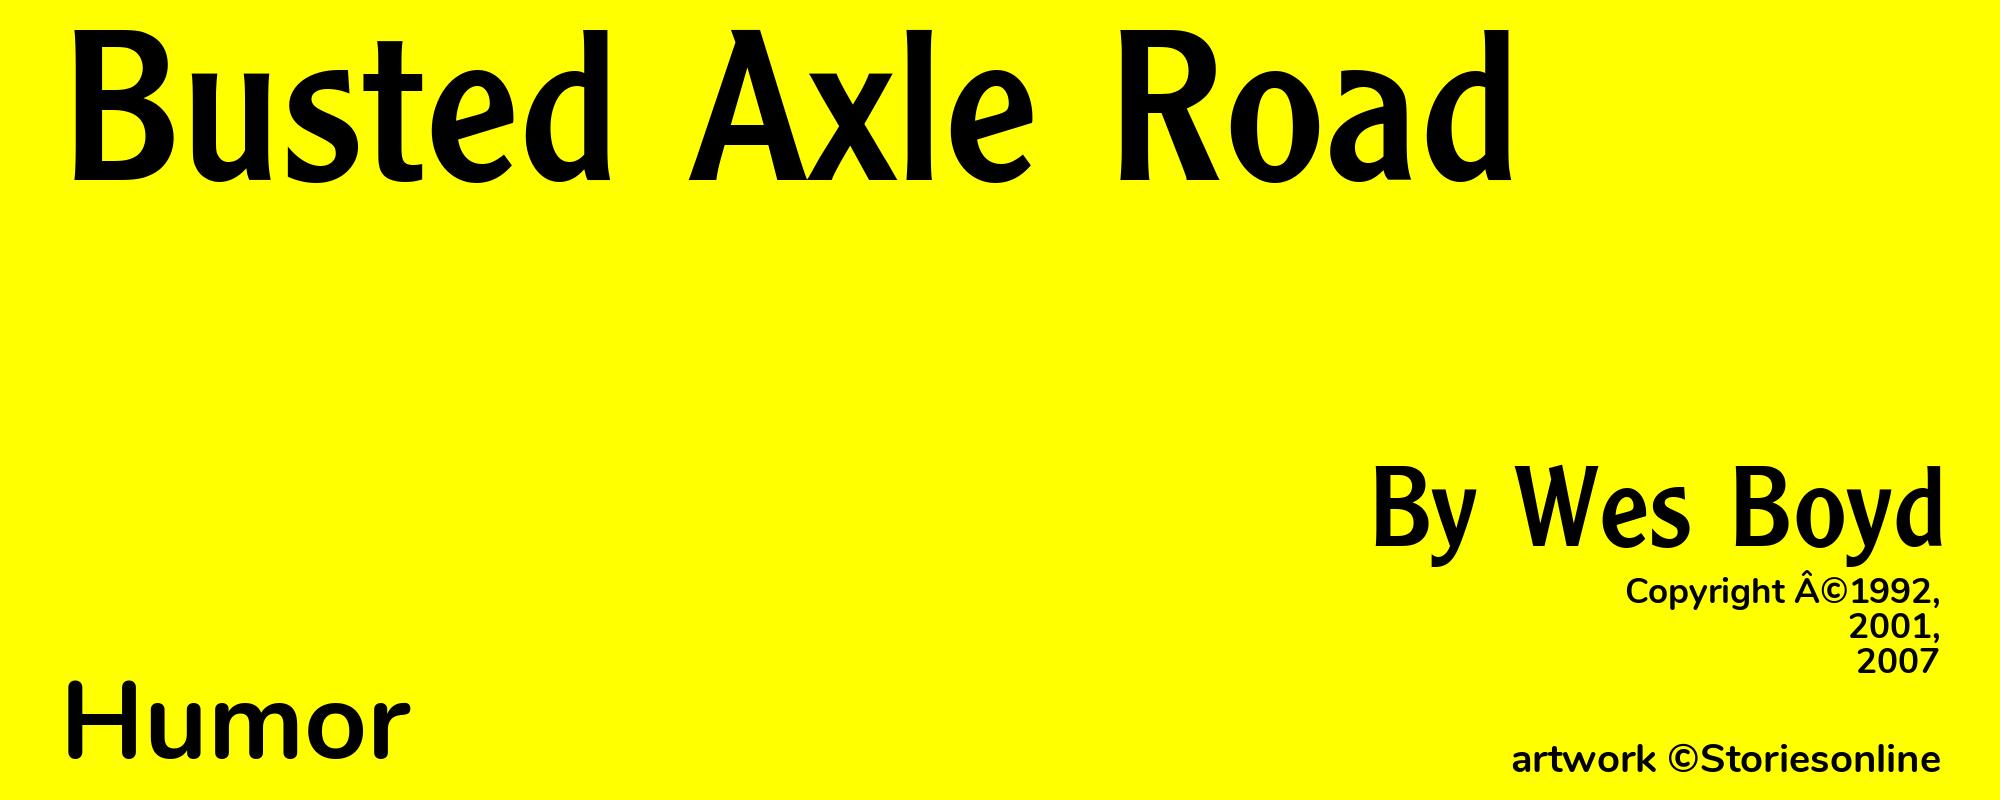 Busted Axle Road - Cover